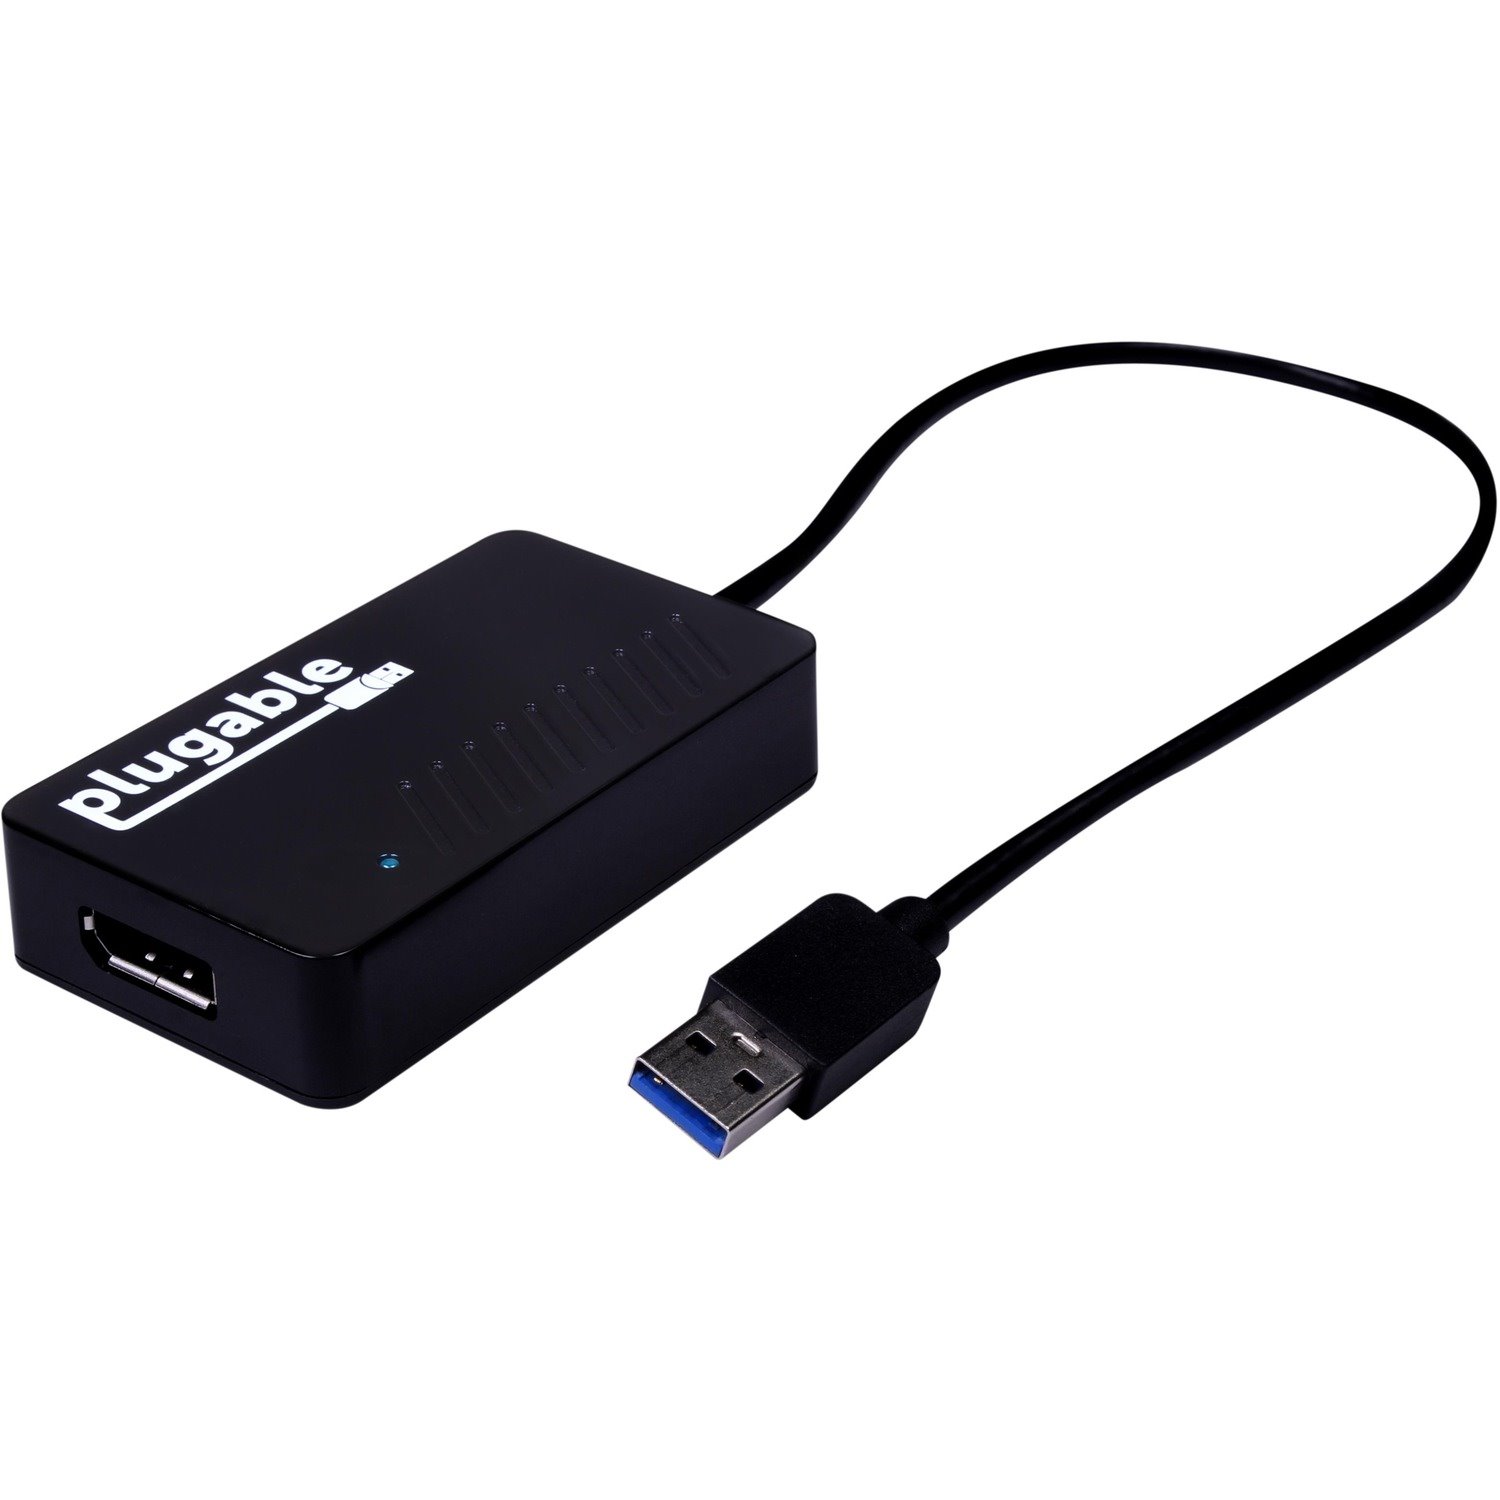 Plugable USB 3.0 to DisplayPort 4K UHD Video Graphics Adapter for Multiple Monitors up to 3840x2160